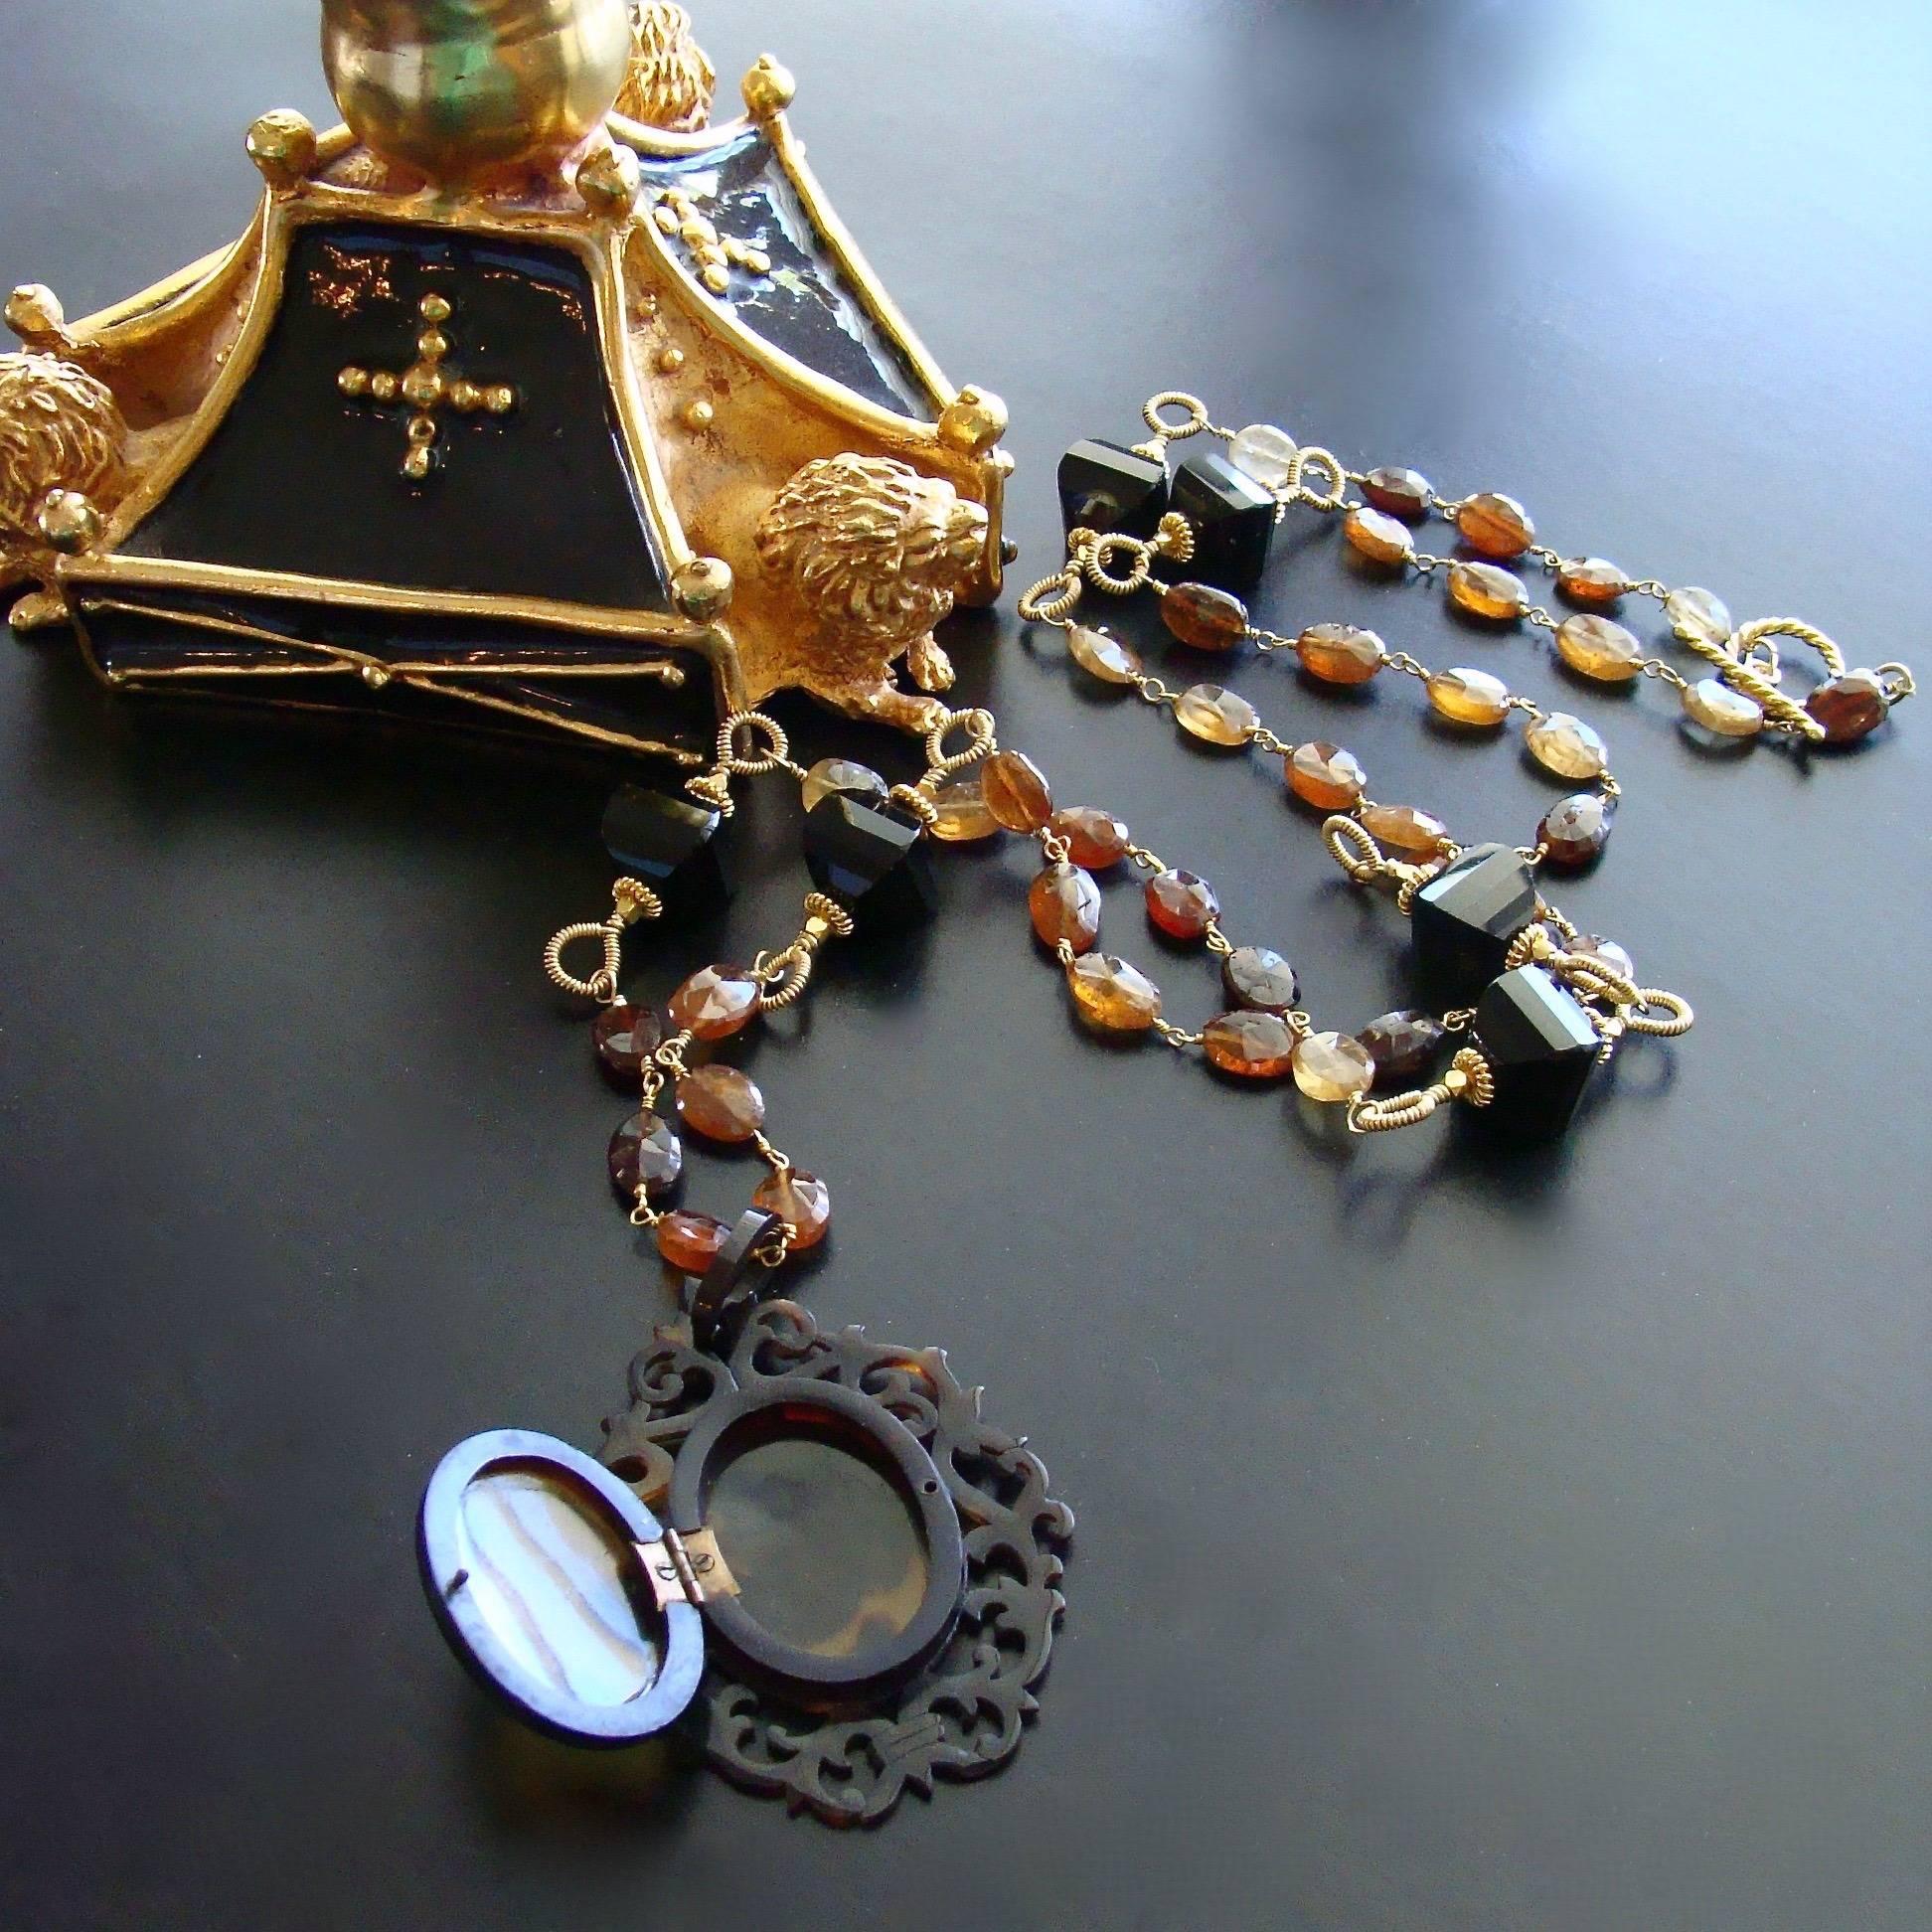 Clarice II Necklace.

A delicate Victorian cartouche embellished Celluloid faux-tortoise antique locket is married to a hand-linked necklace of hessonite garnet with hand-coiled onyx lantern beads stationed along the chain.  This delicate locket 